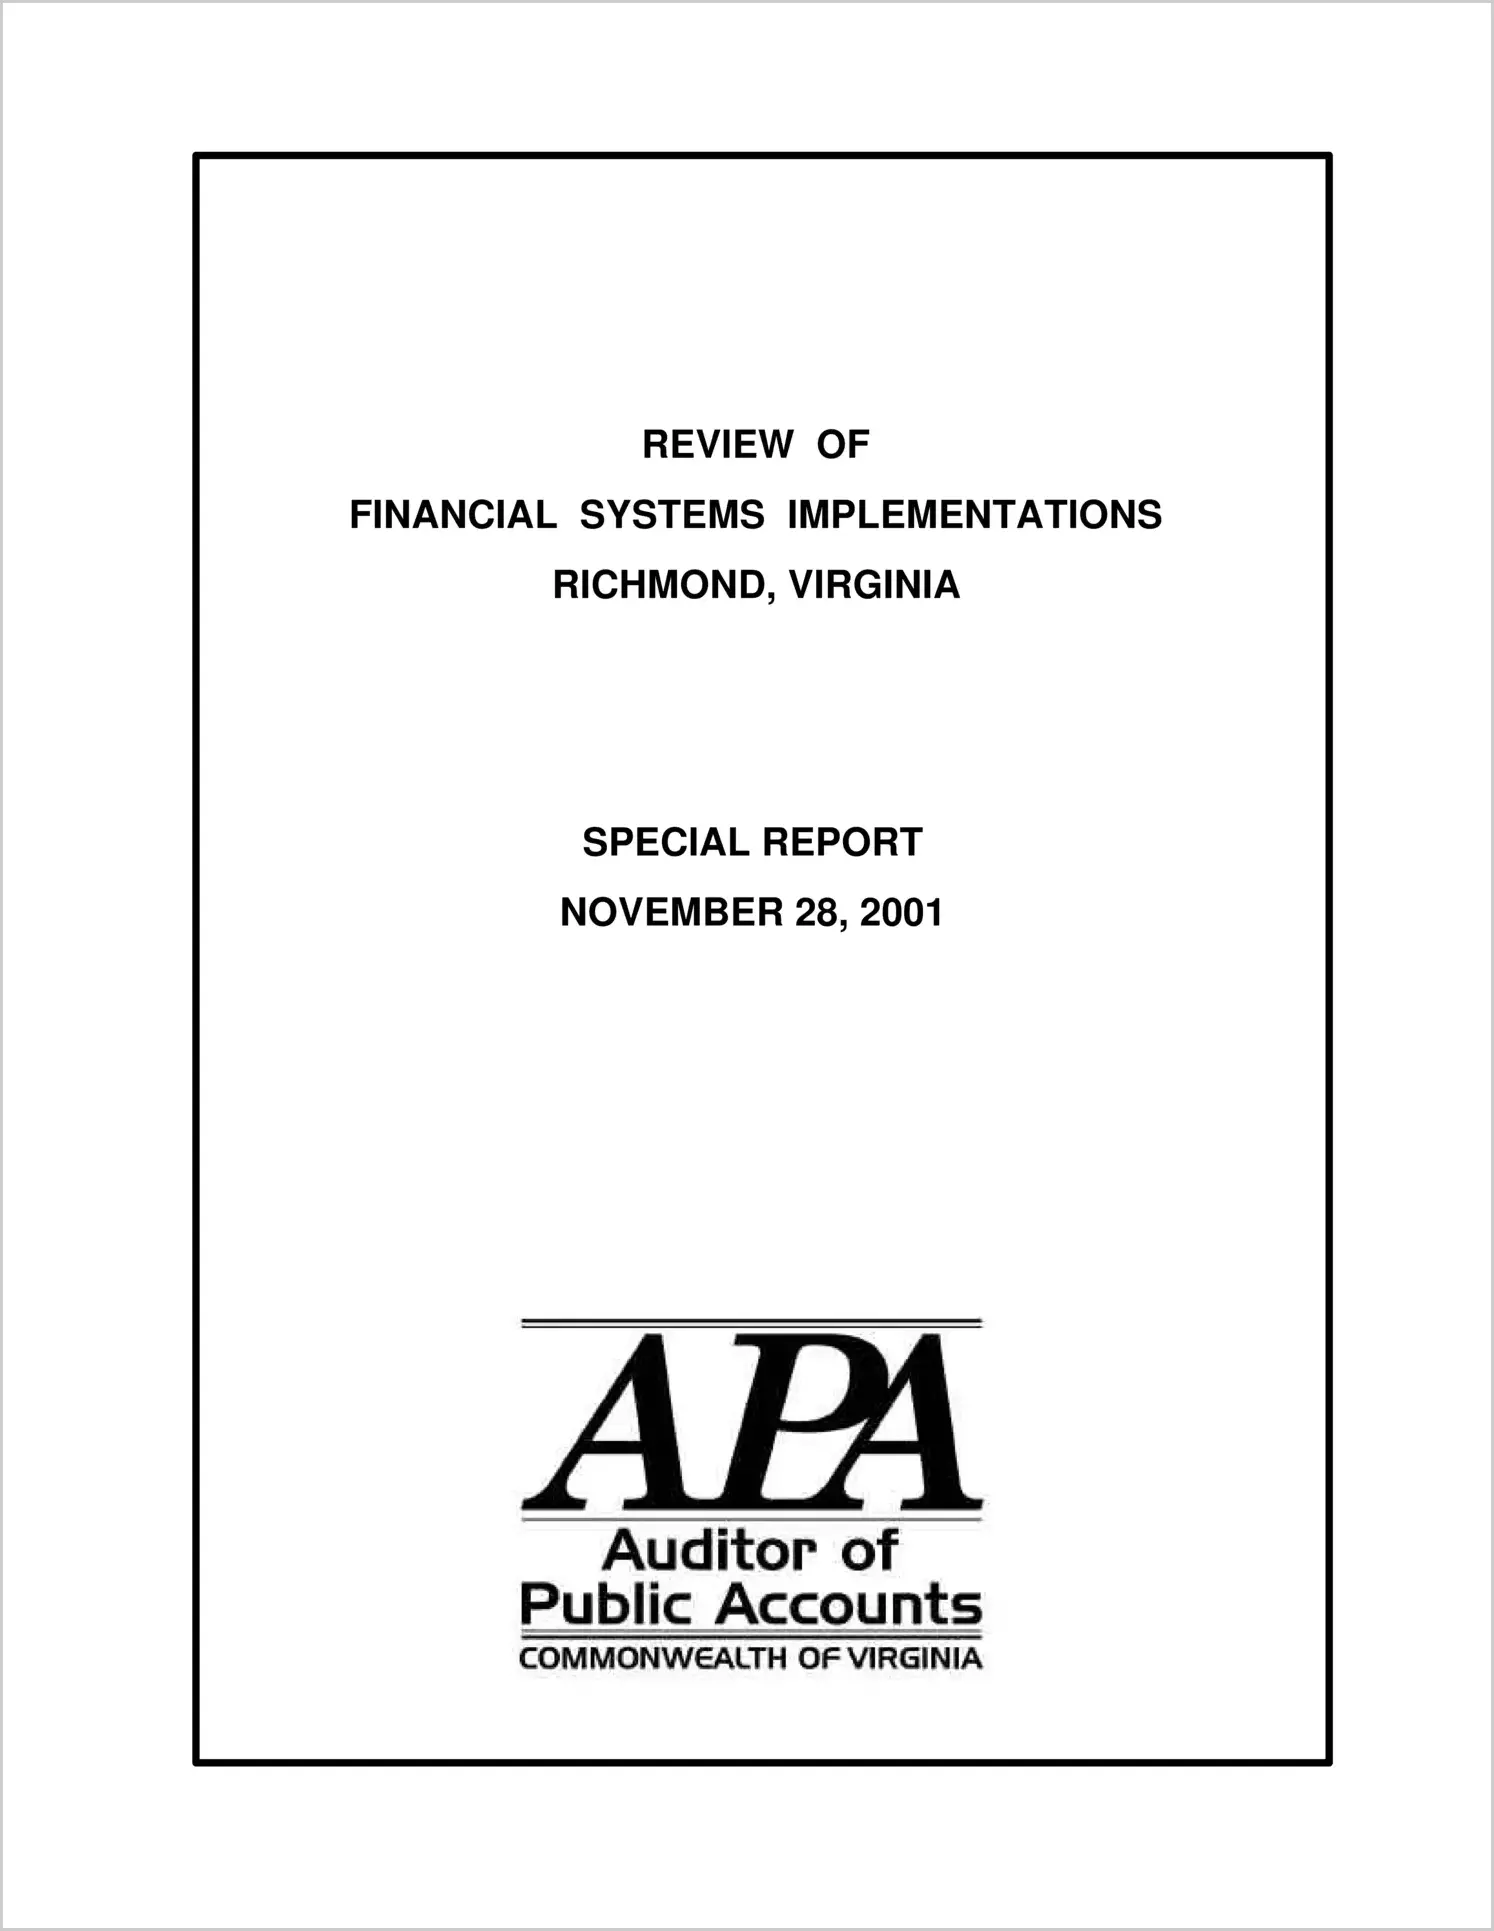 Special ReportReview of Financial Systems Implementations(Report Date: 11/28/2001)